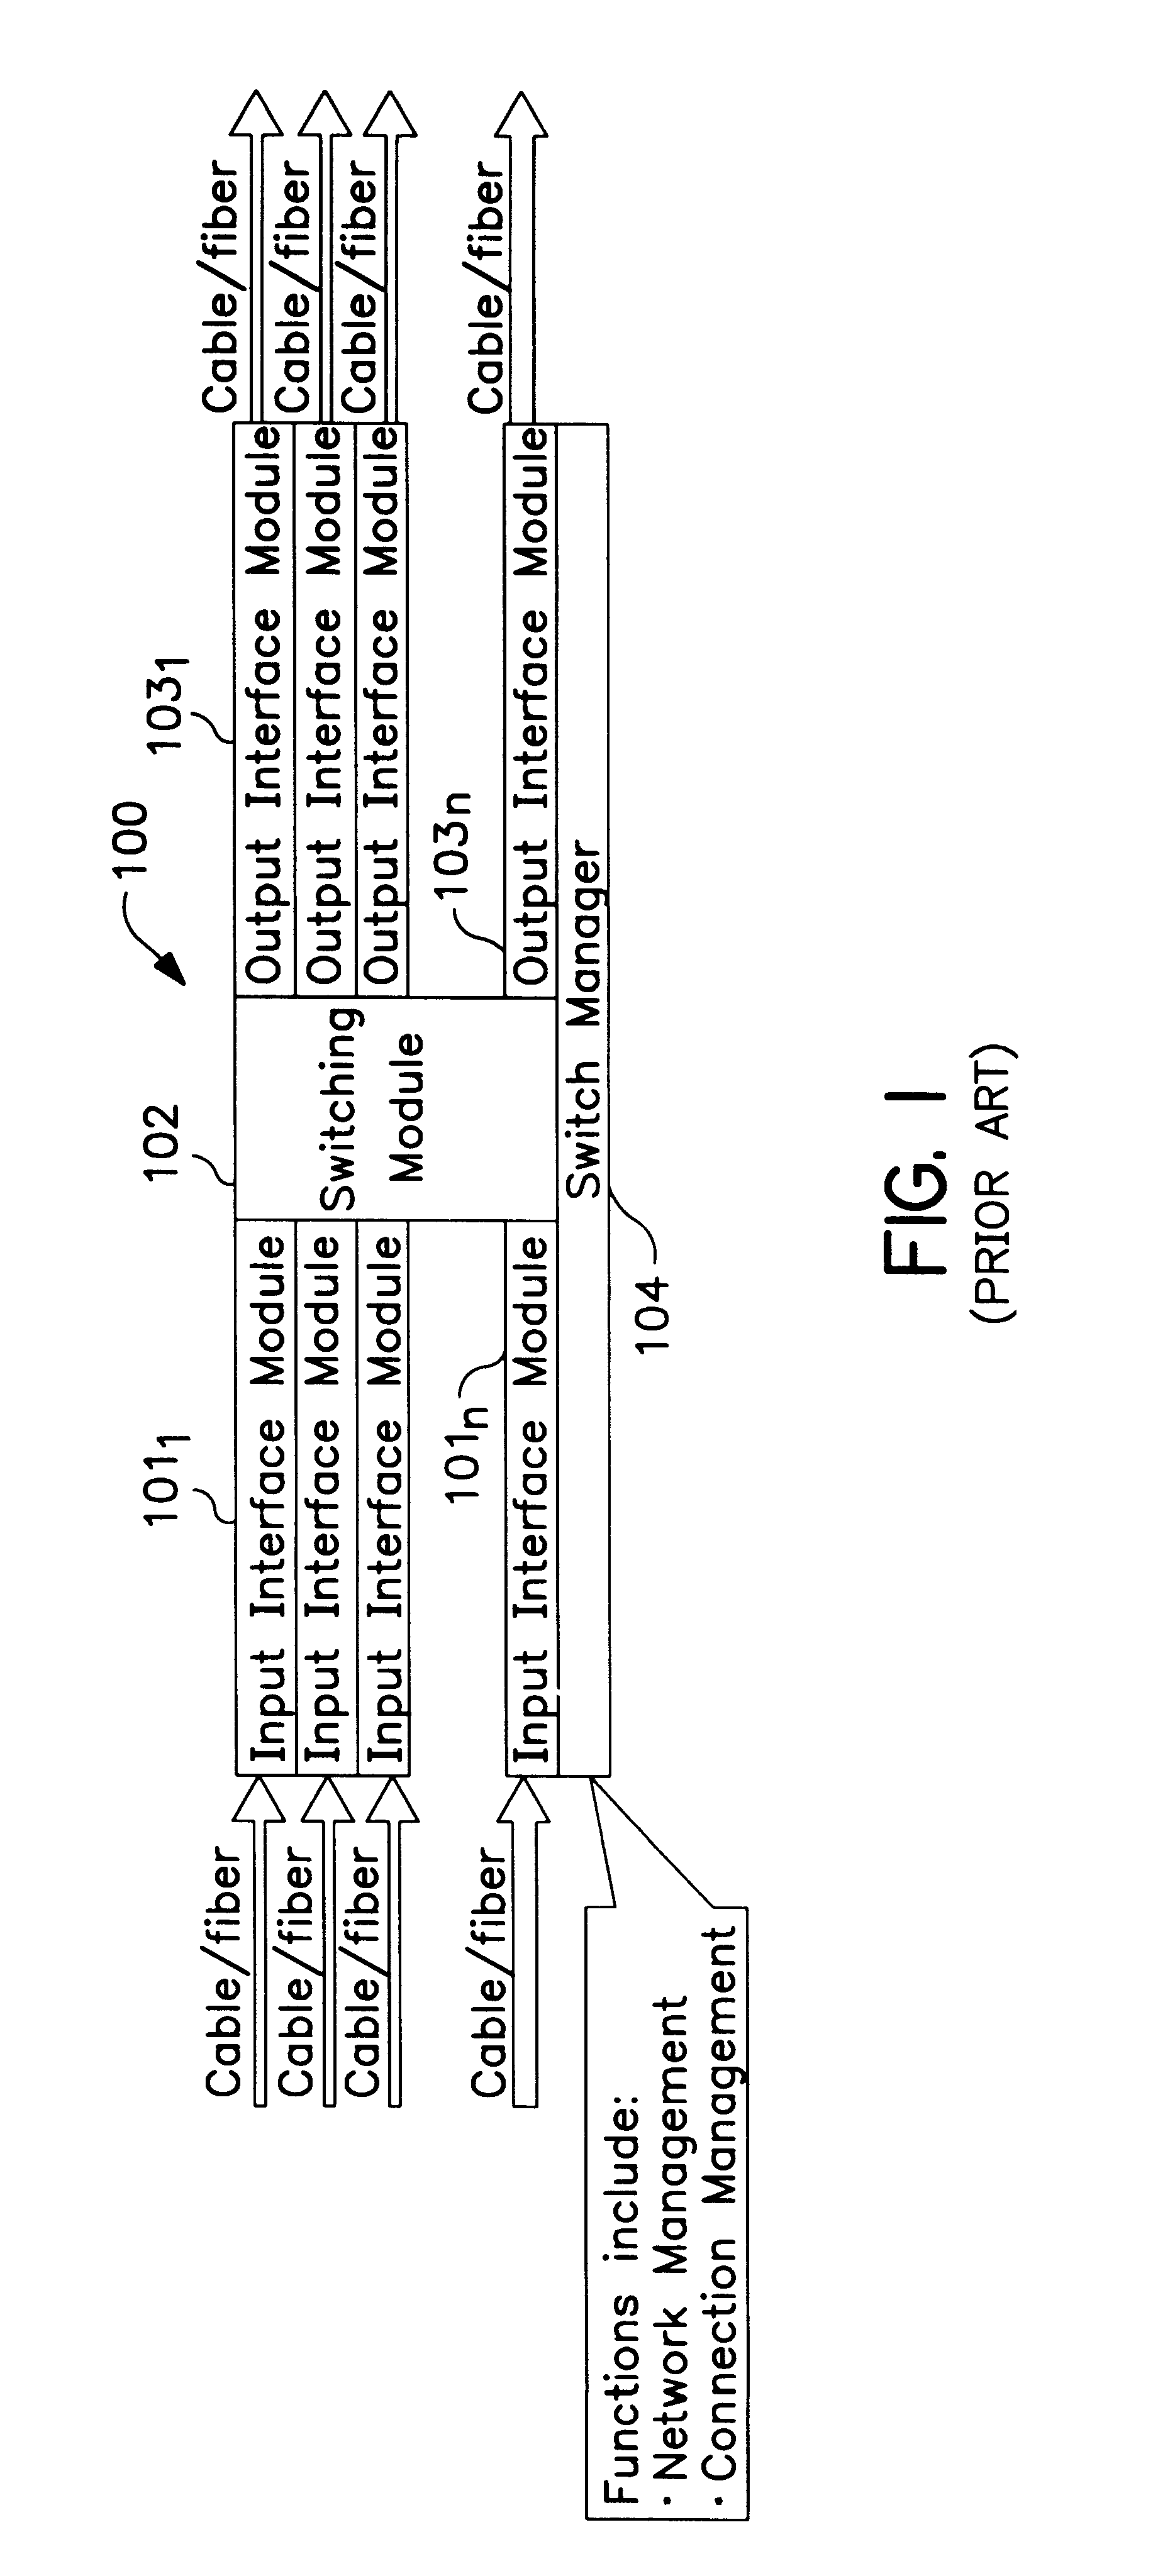 Packet switch control with layered software